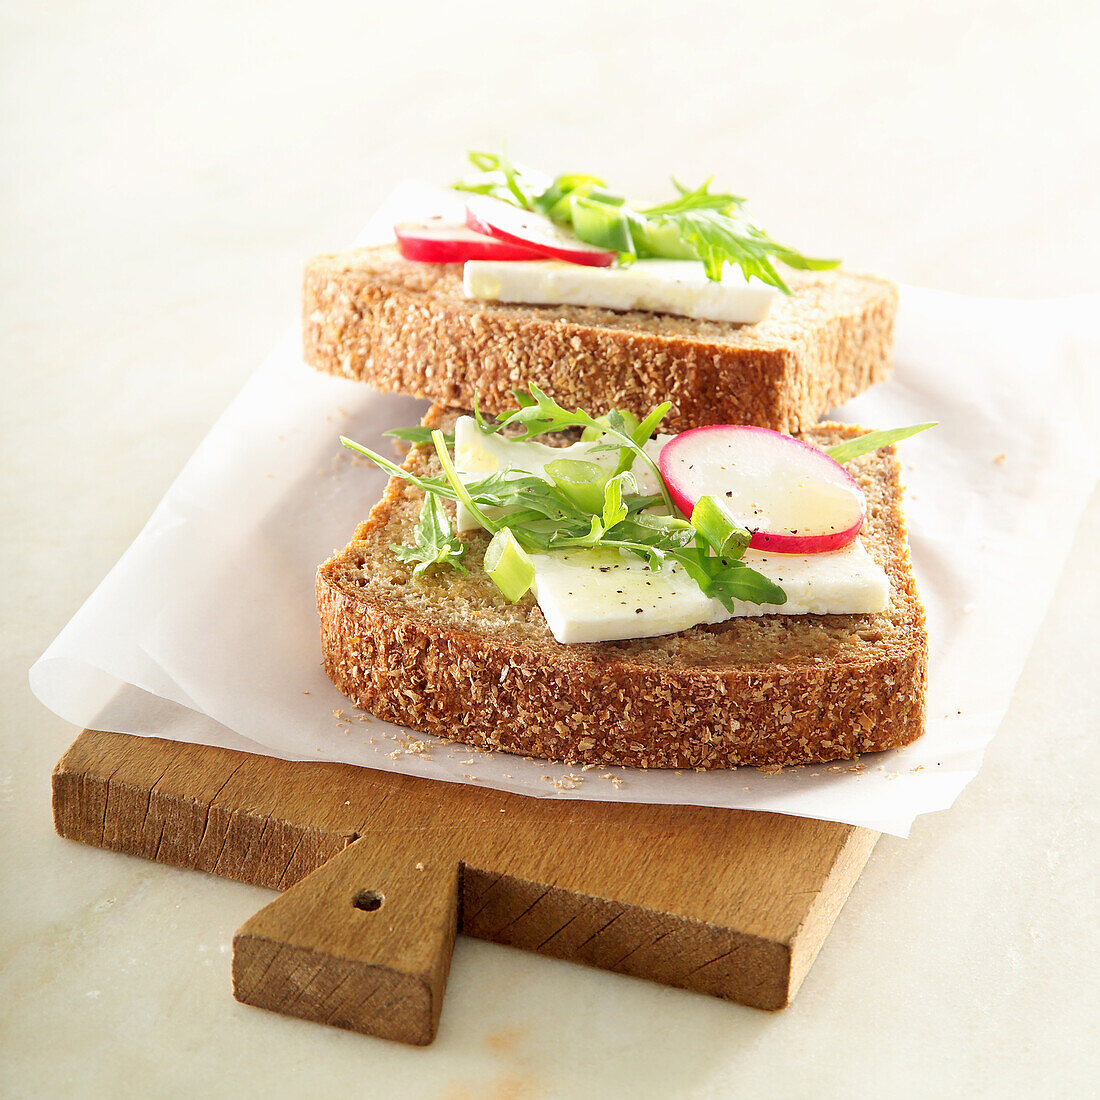 Bran bread with cheese and radishes